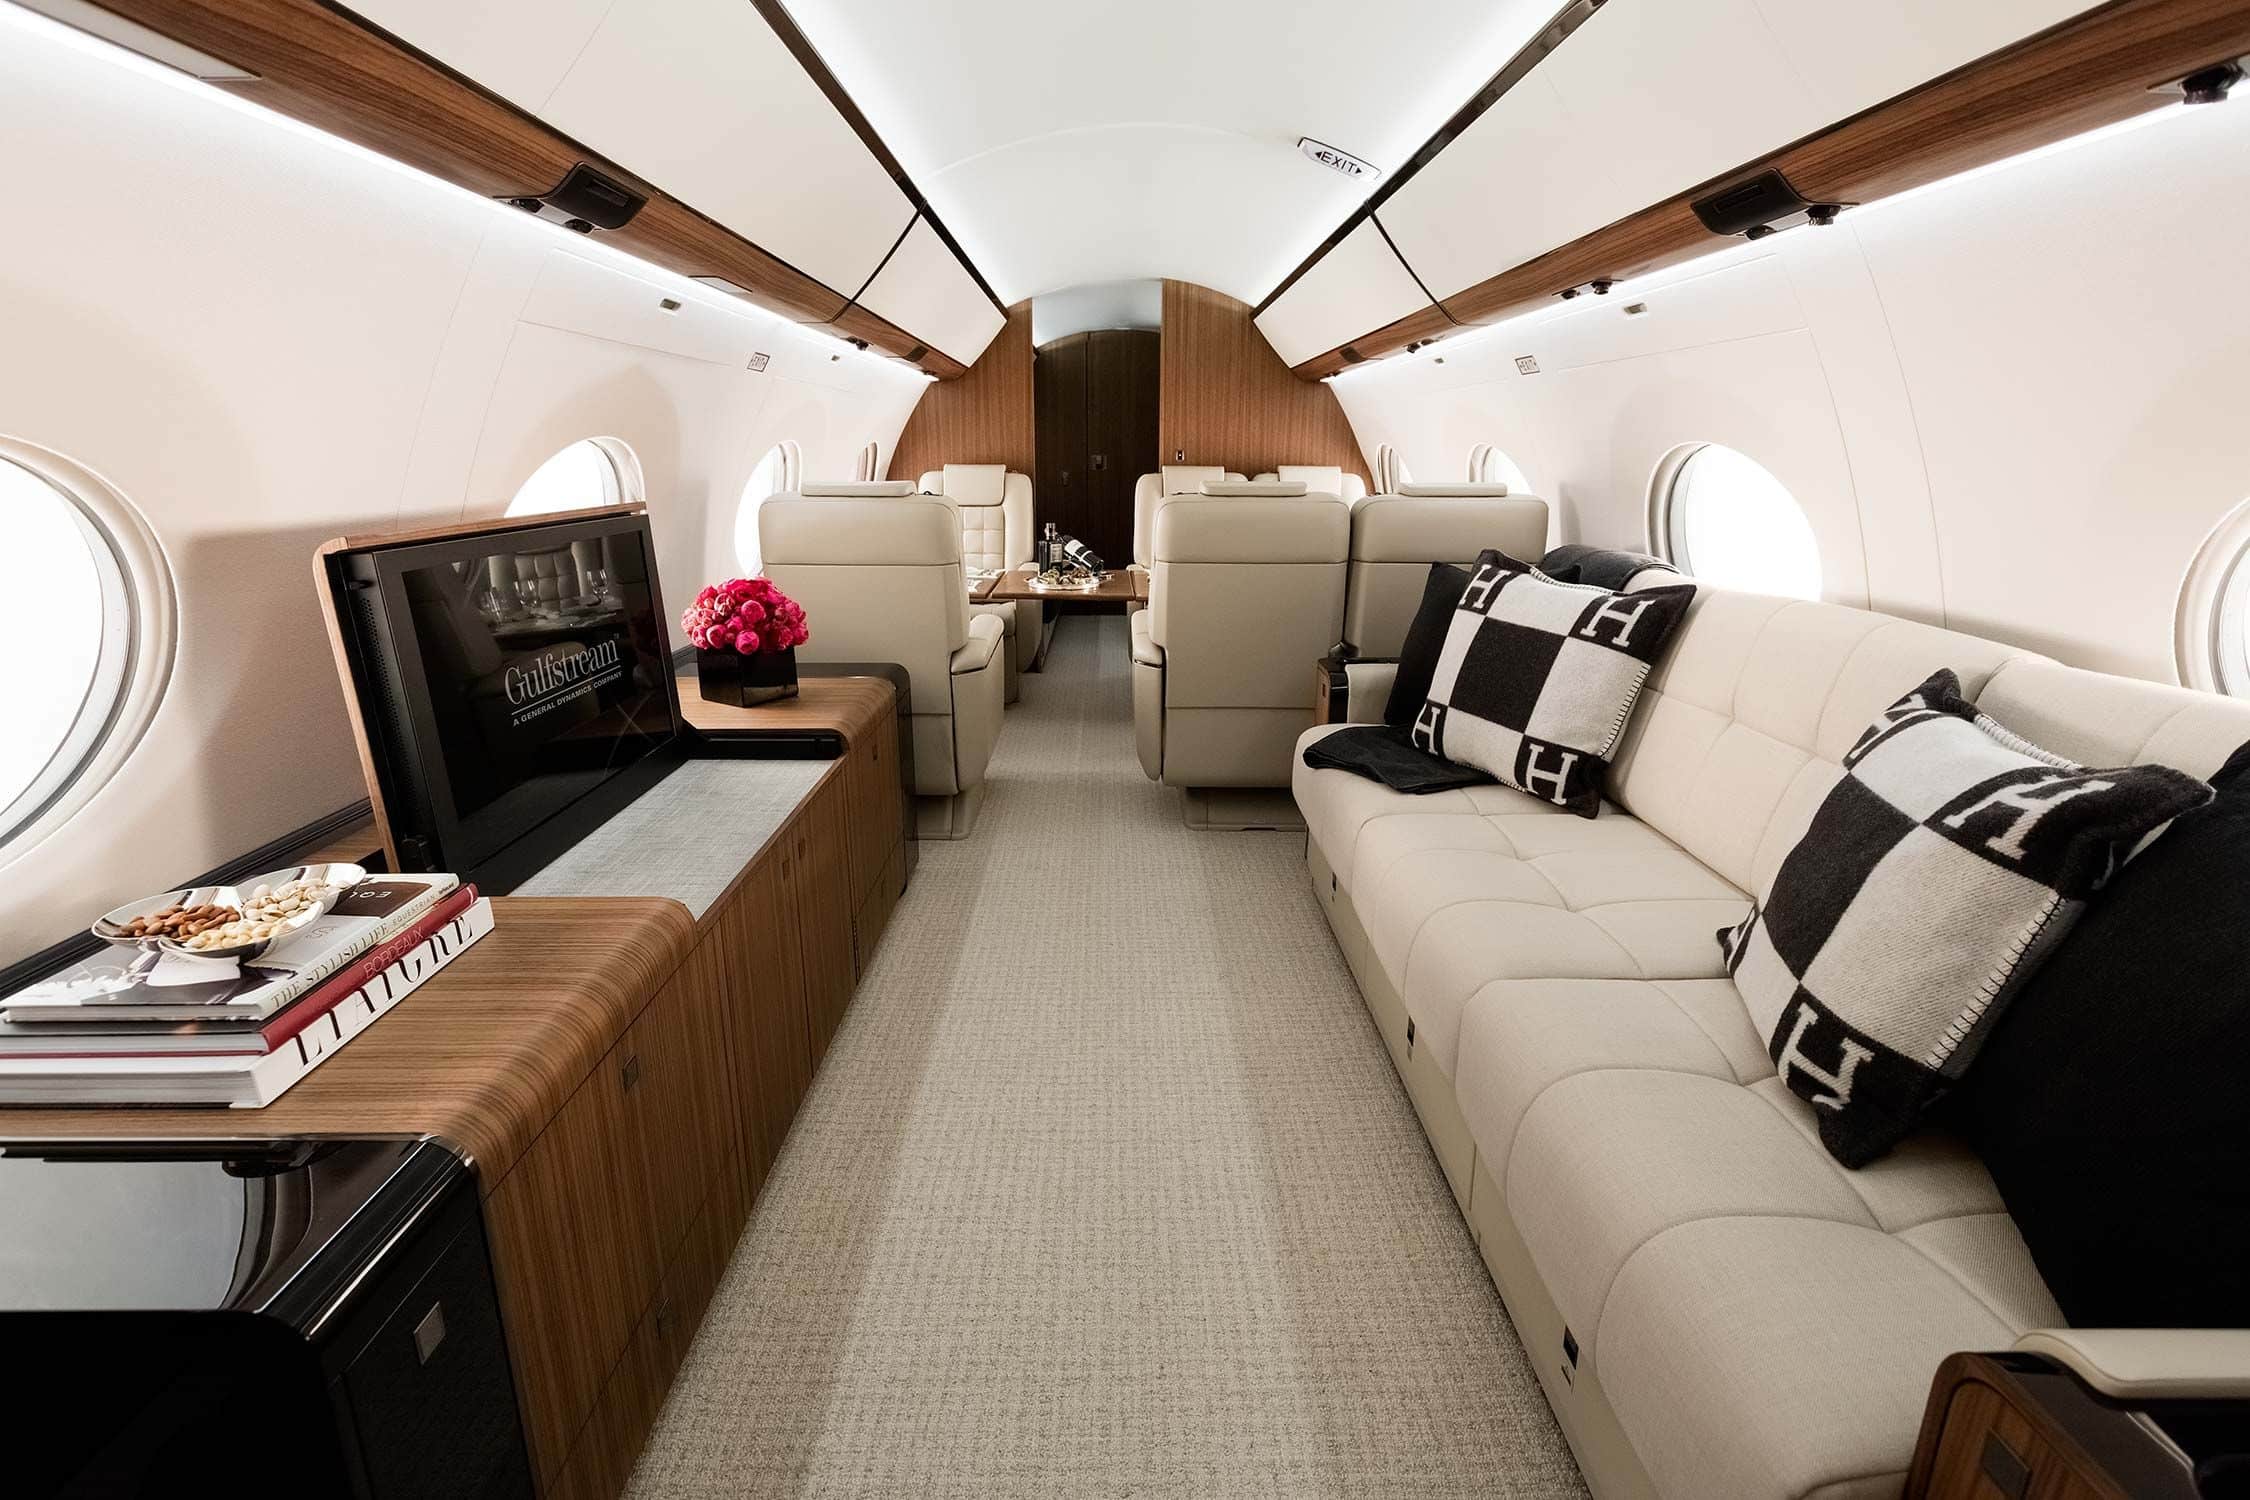 The World’s 5 most expensive private jets